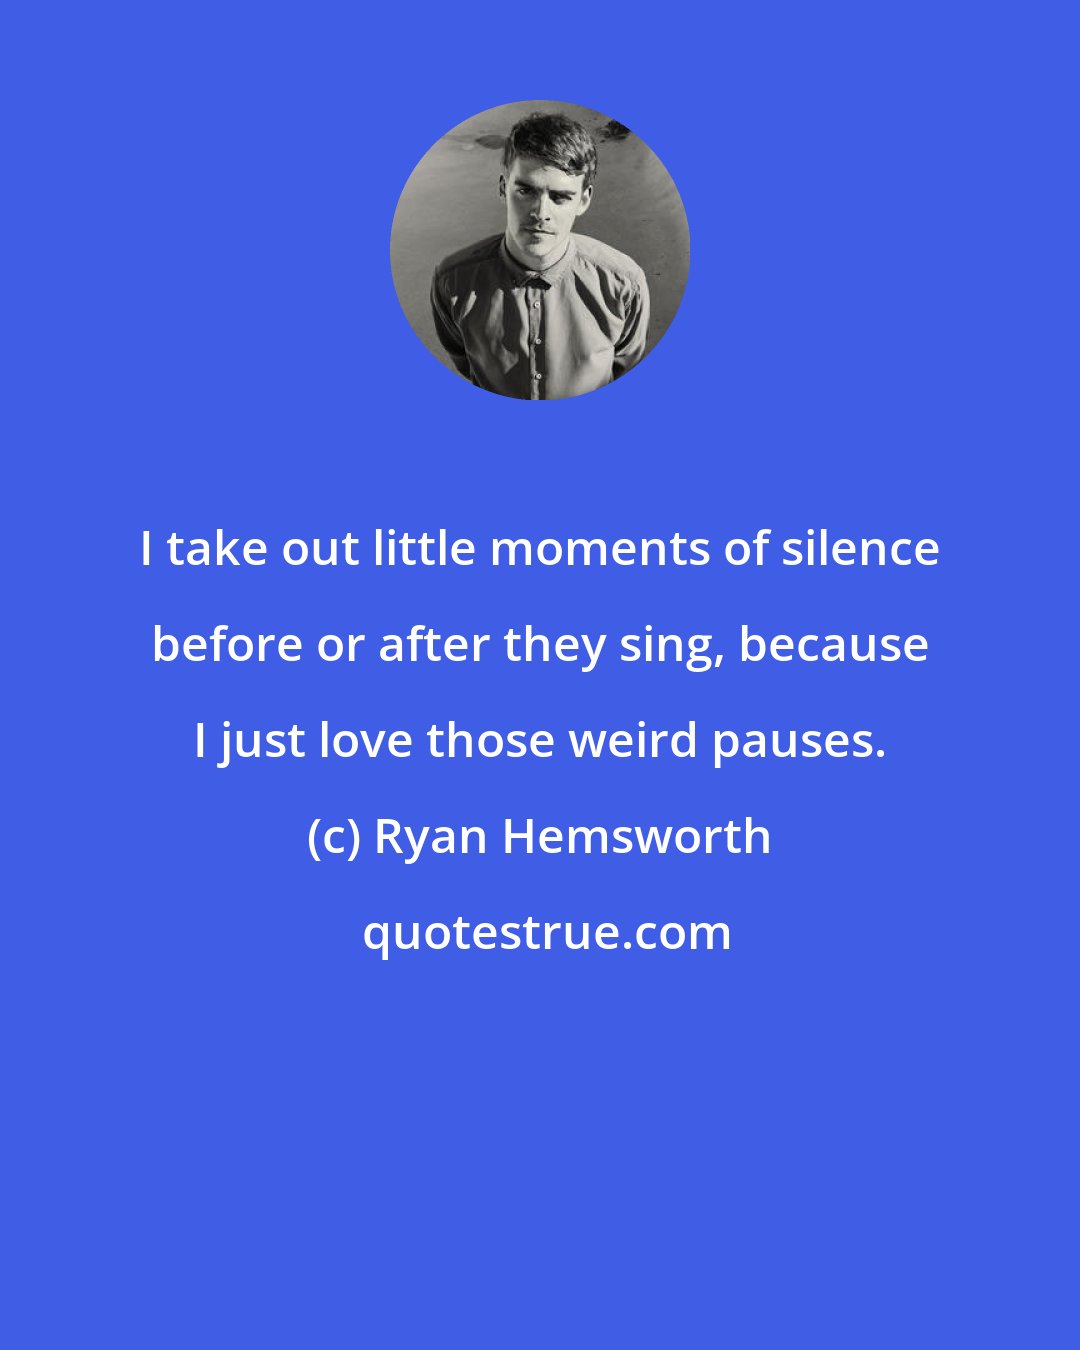 Ryan Hemsworth: I take out little moments of silence before or after they sing, because I just love those weird pauses.